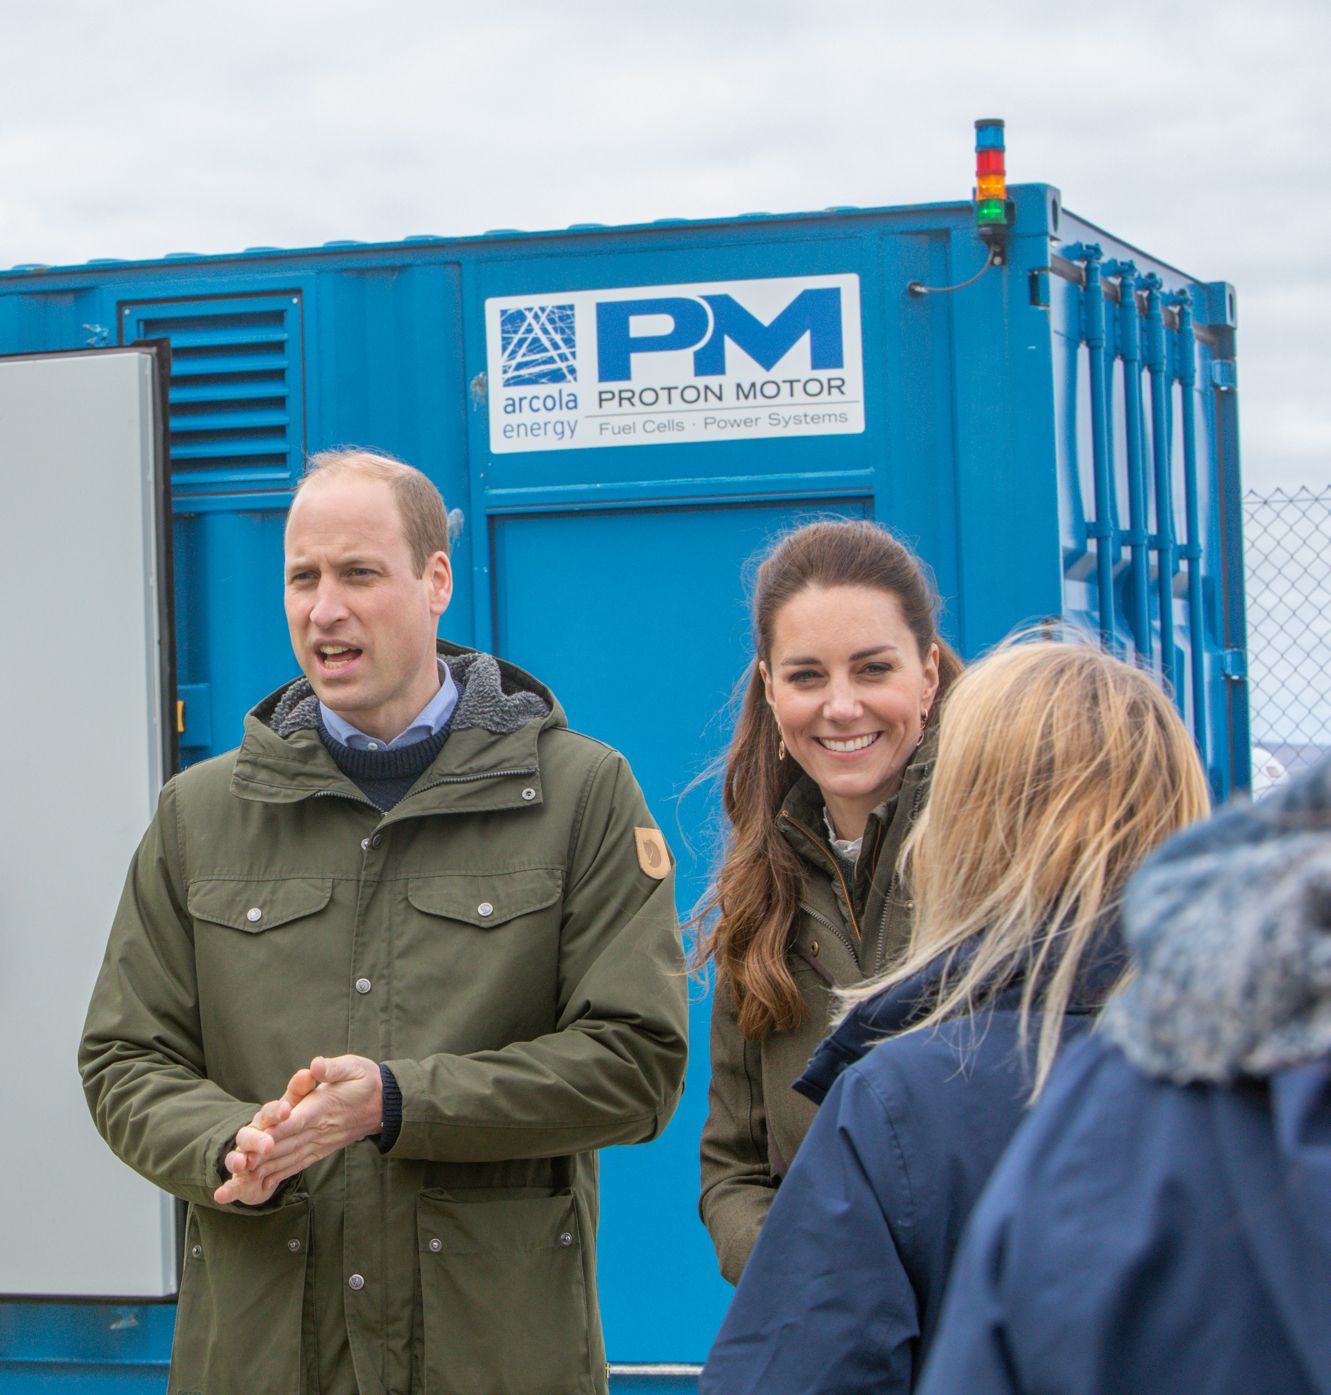 Royal couple visited Proton Motor“s fuel cell power plant on Orkney